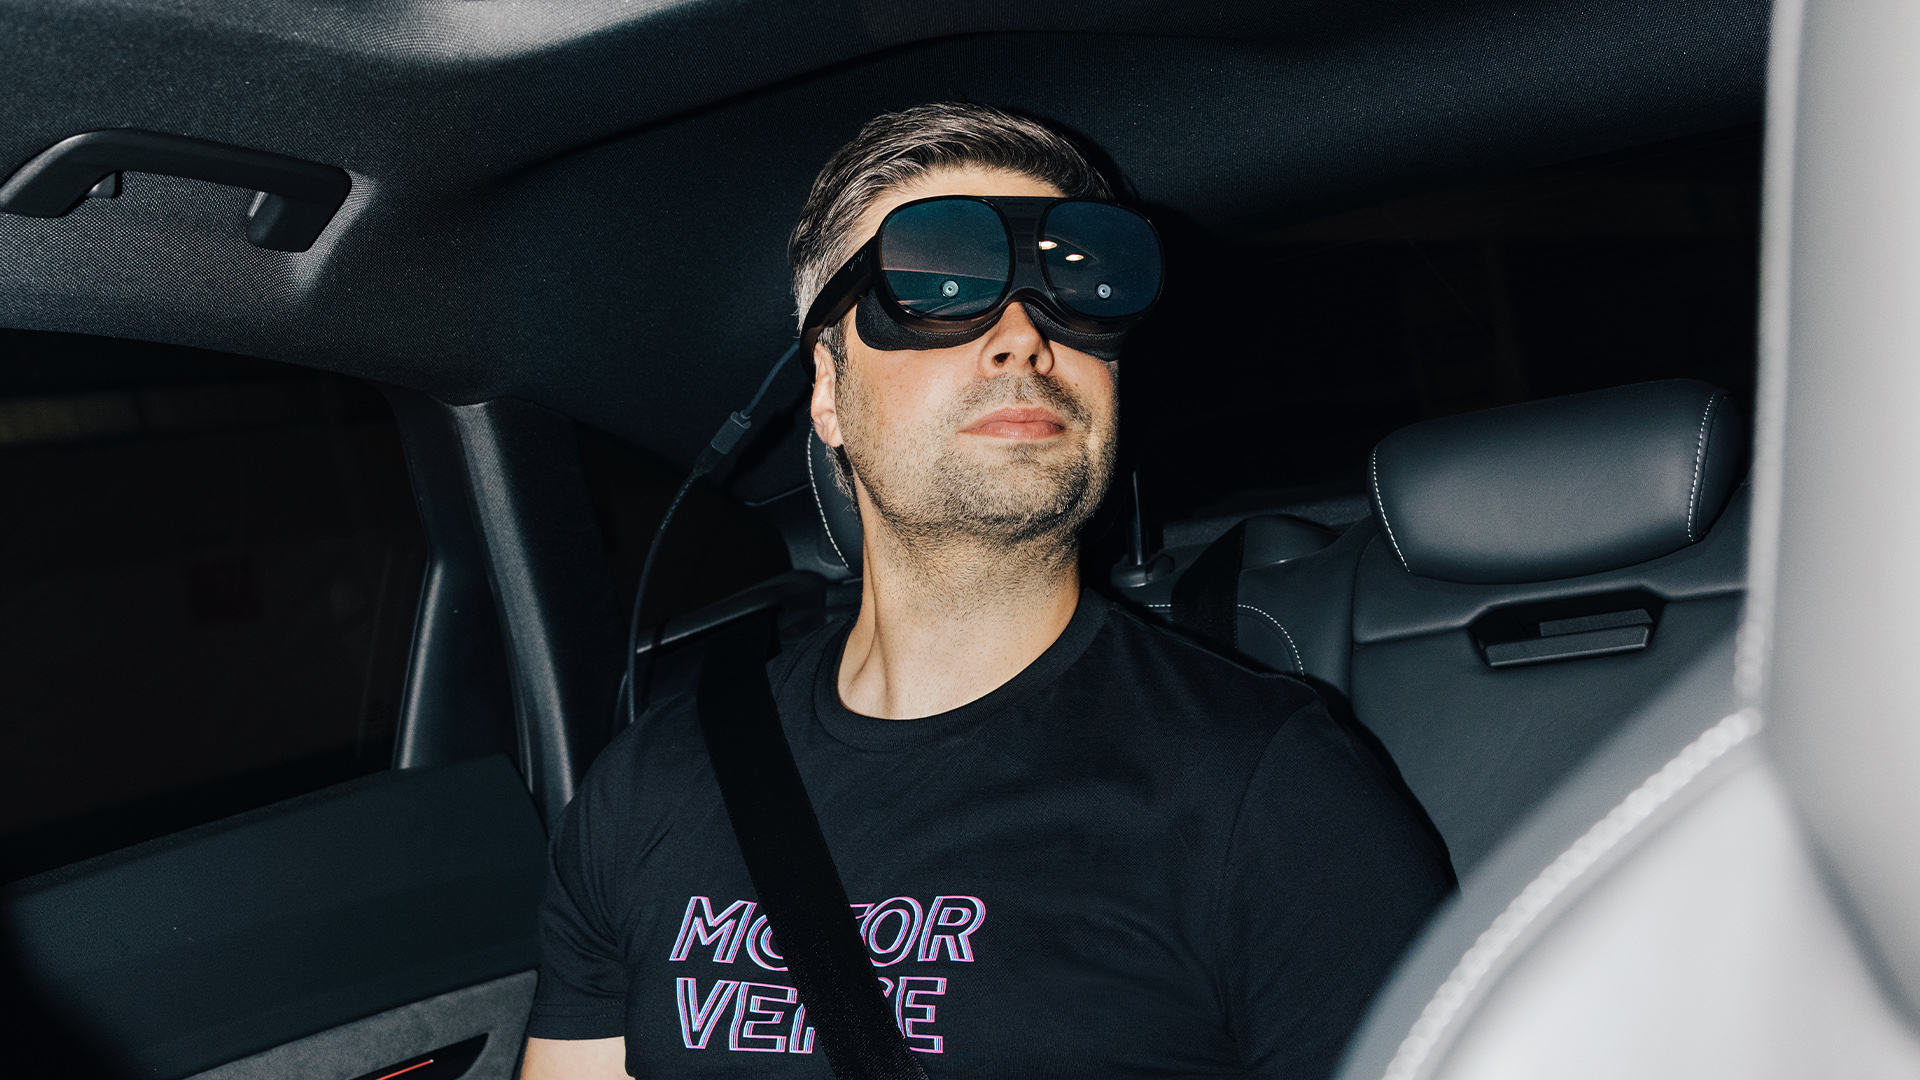 Nils Wollny sitting in the back seat of an Audi wearing VR goggles.